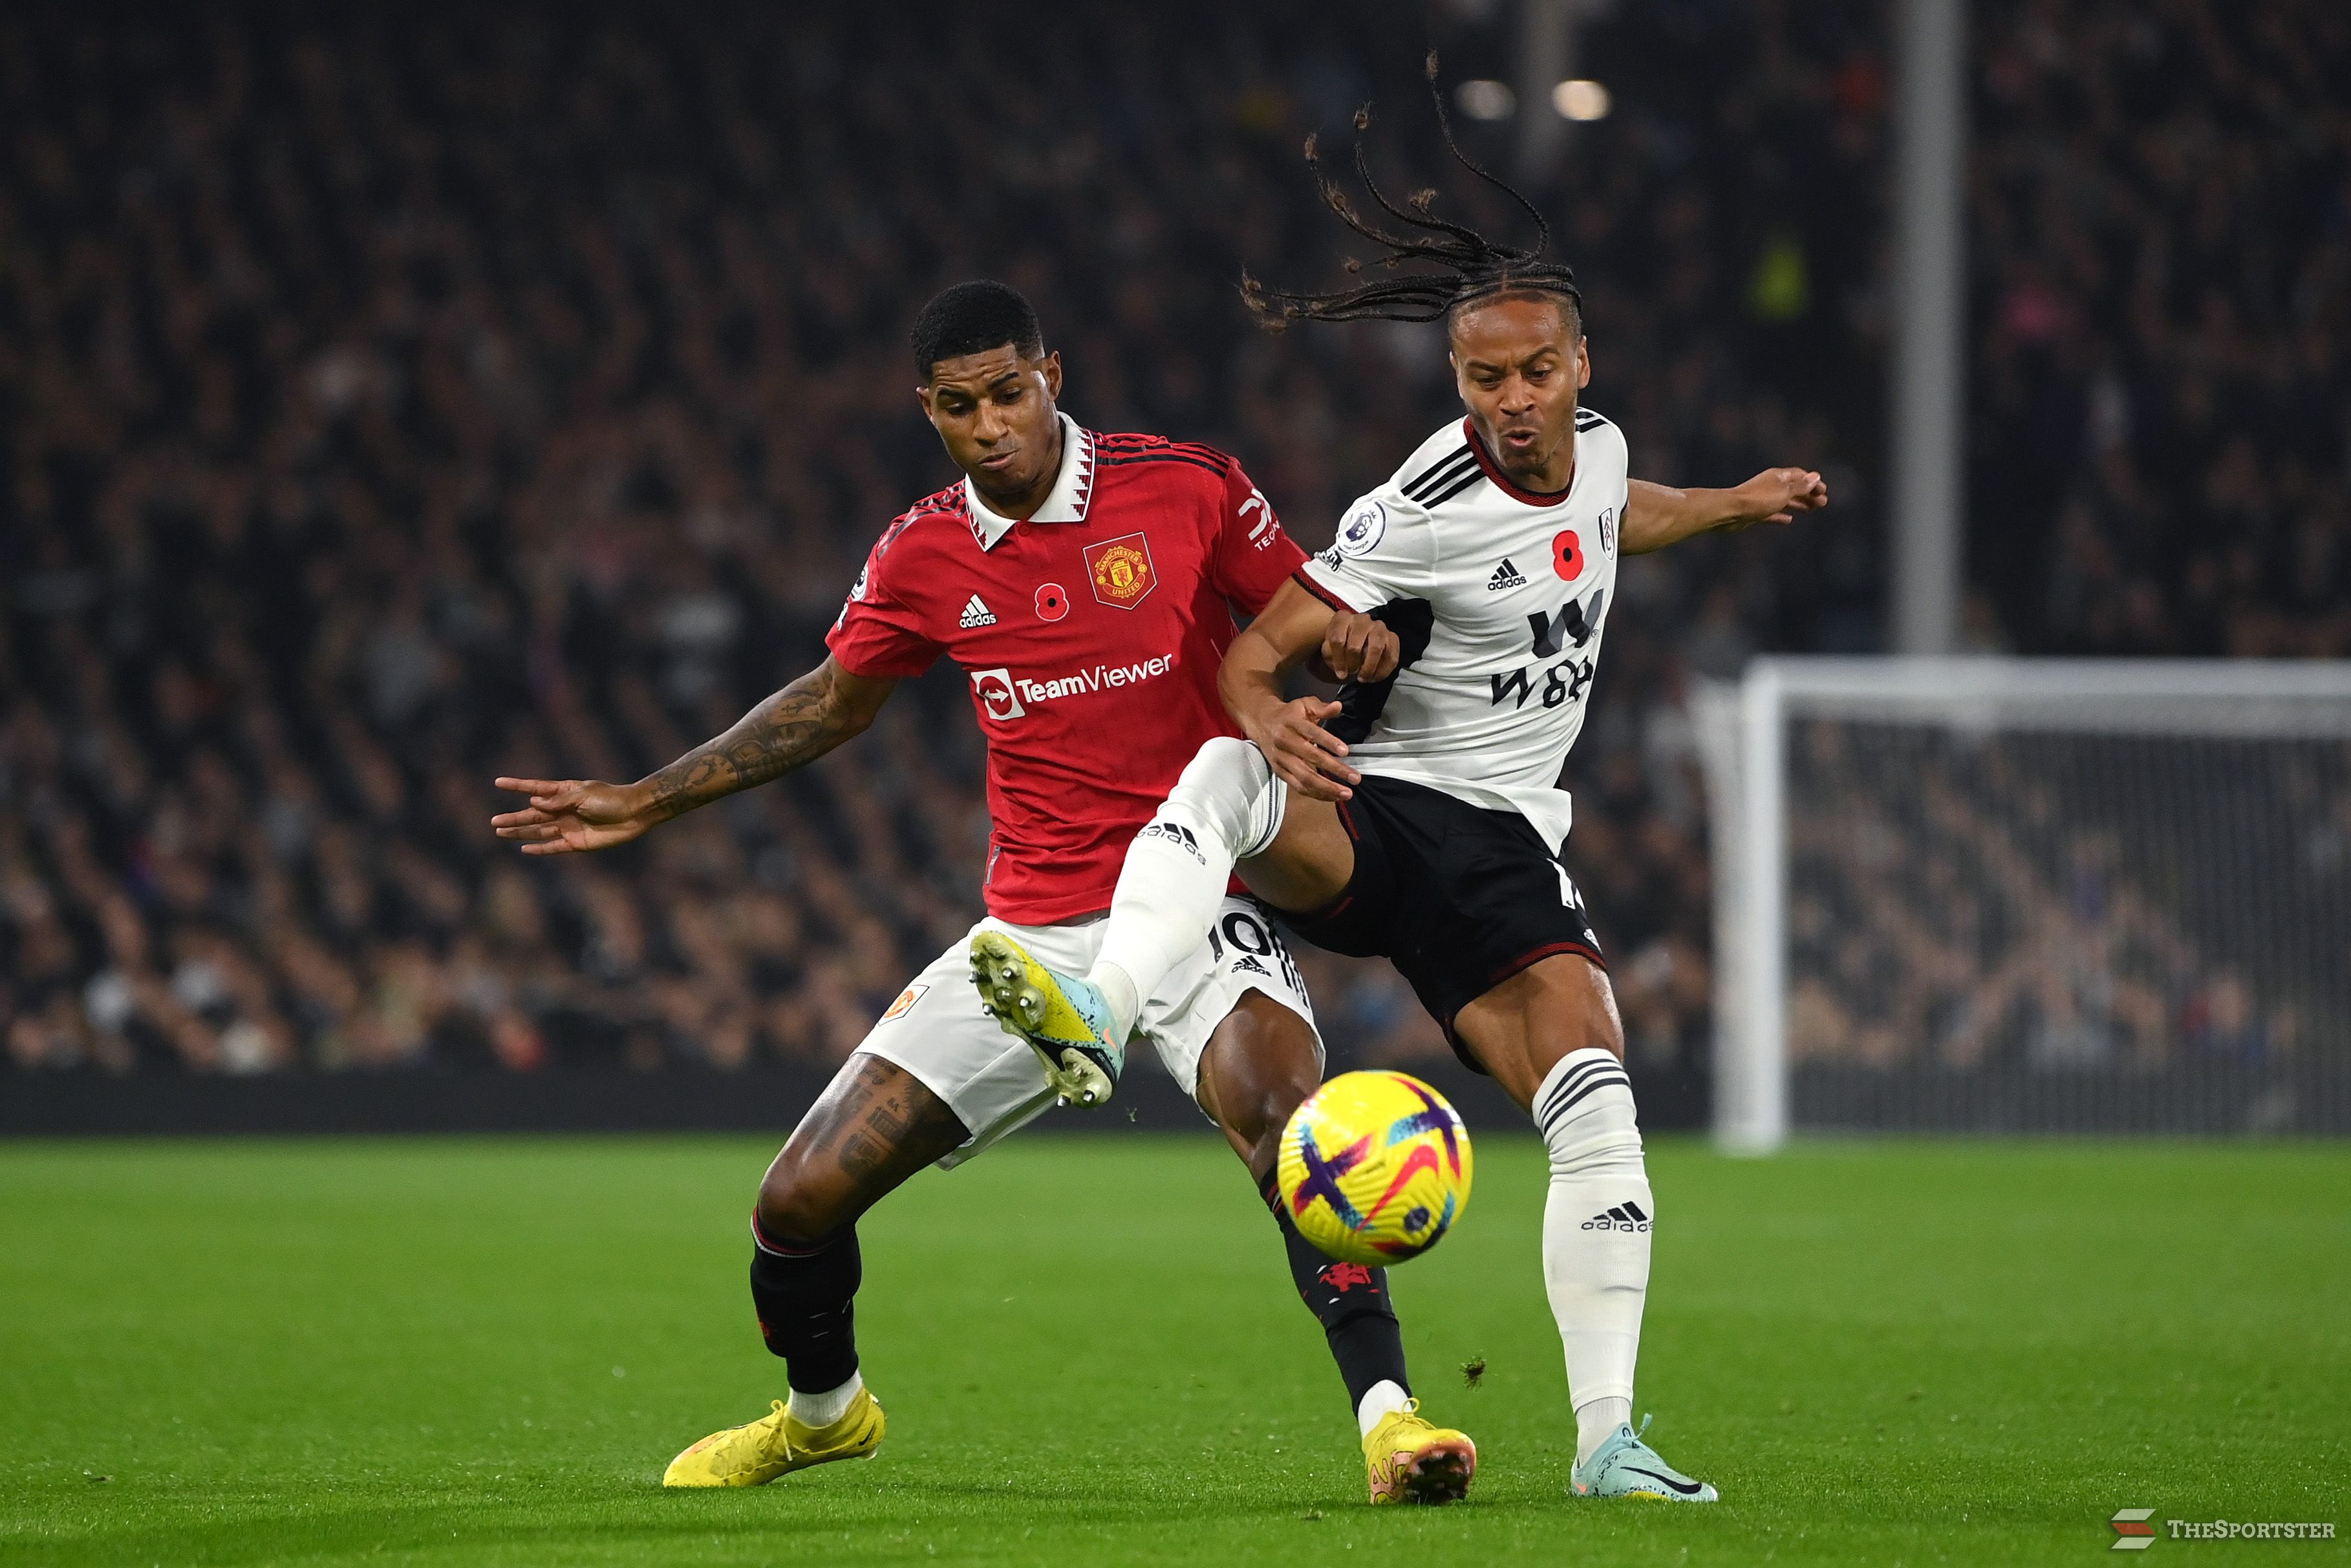 LONDON, ENGLAND - NOVEMBER 13: Marcus Rashford of Manchester United and Bobby Reid of Fulham battle for the ball during the Premier League match between Fulham FC and Manchester United at Craven Cottage on November 13, 2022 in London, England. (Photo by Justin Setterfield/Getty Images)